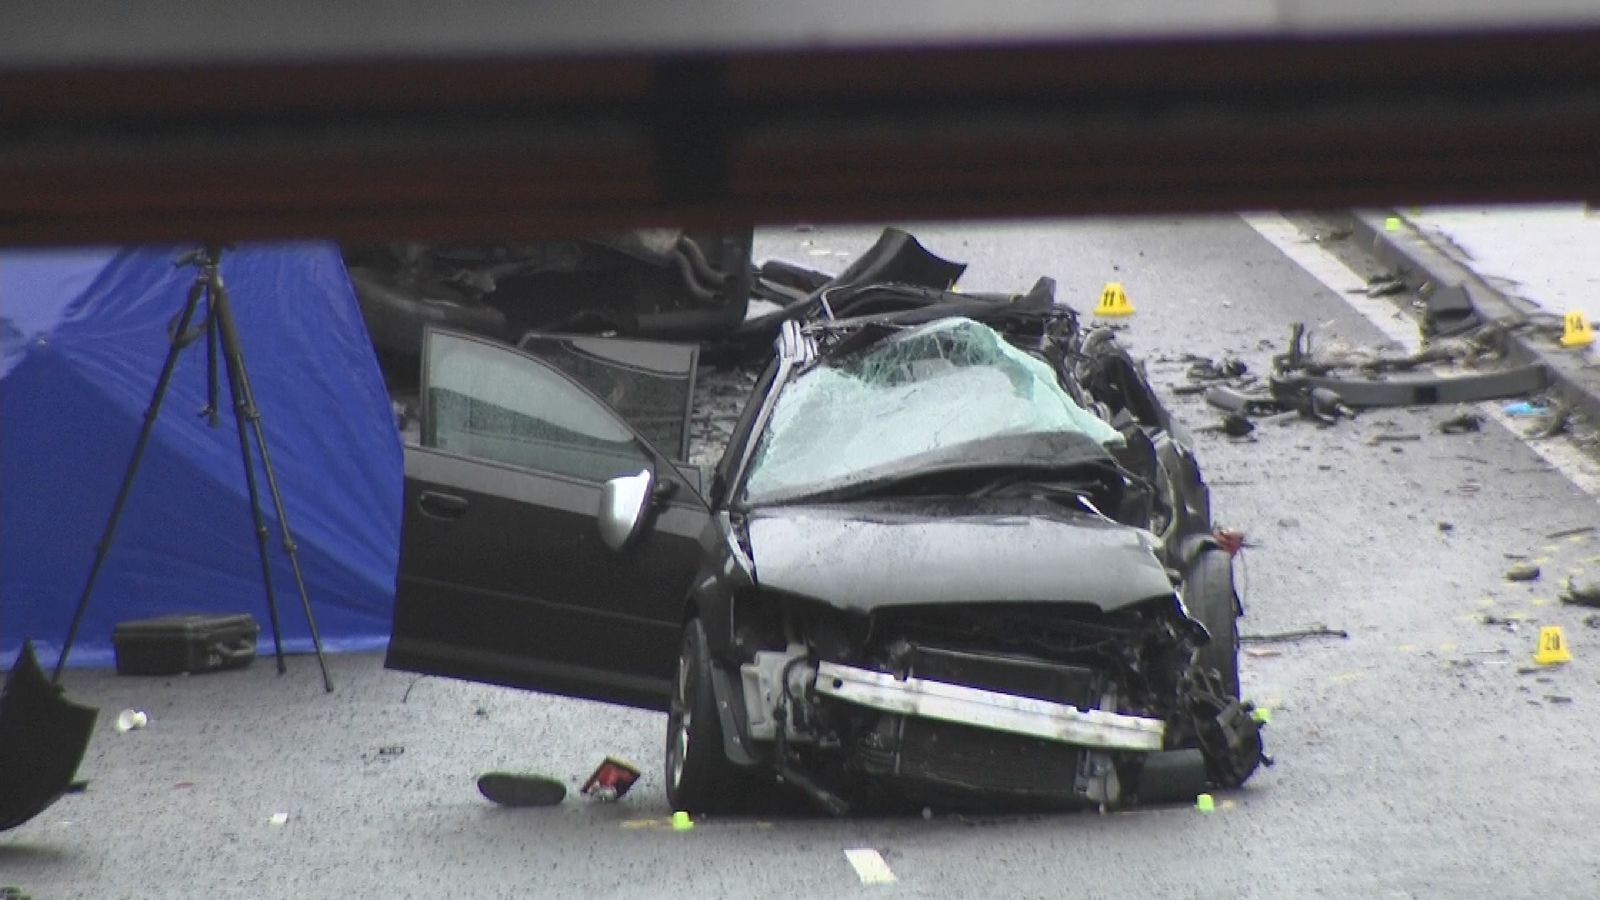 Two more victims of Birmingham pileup identified by police